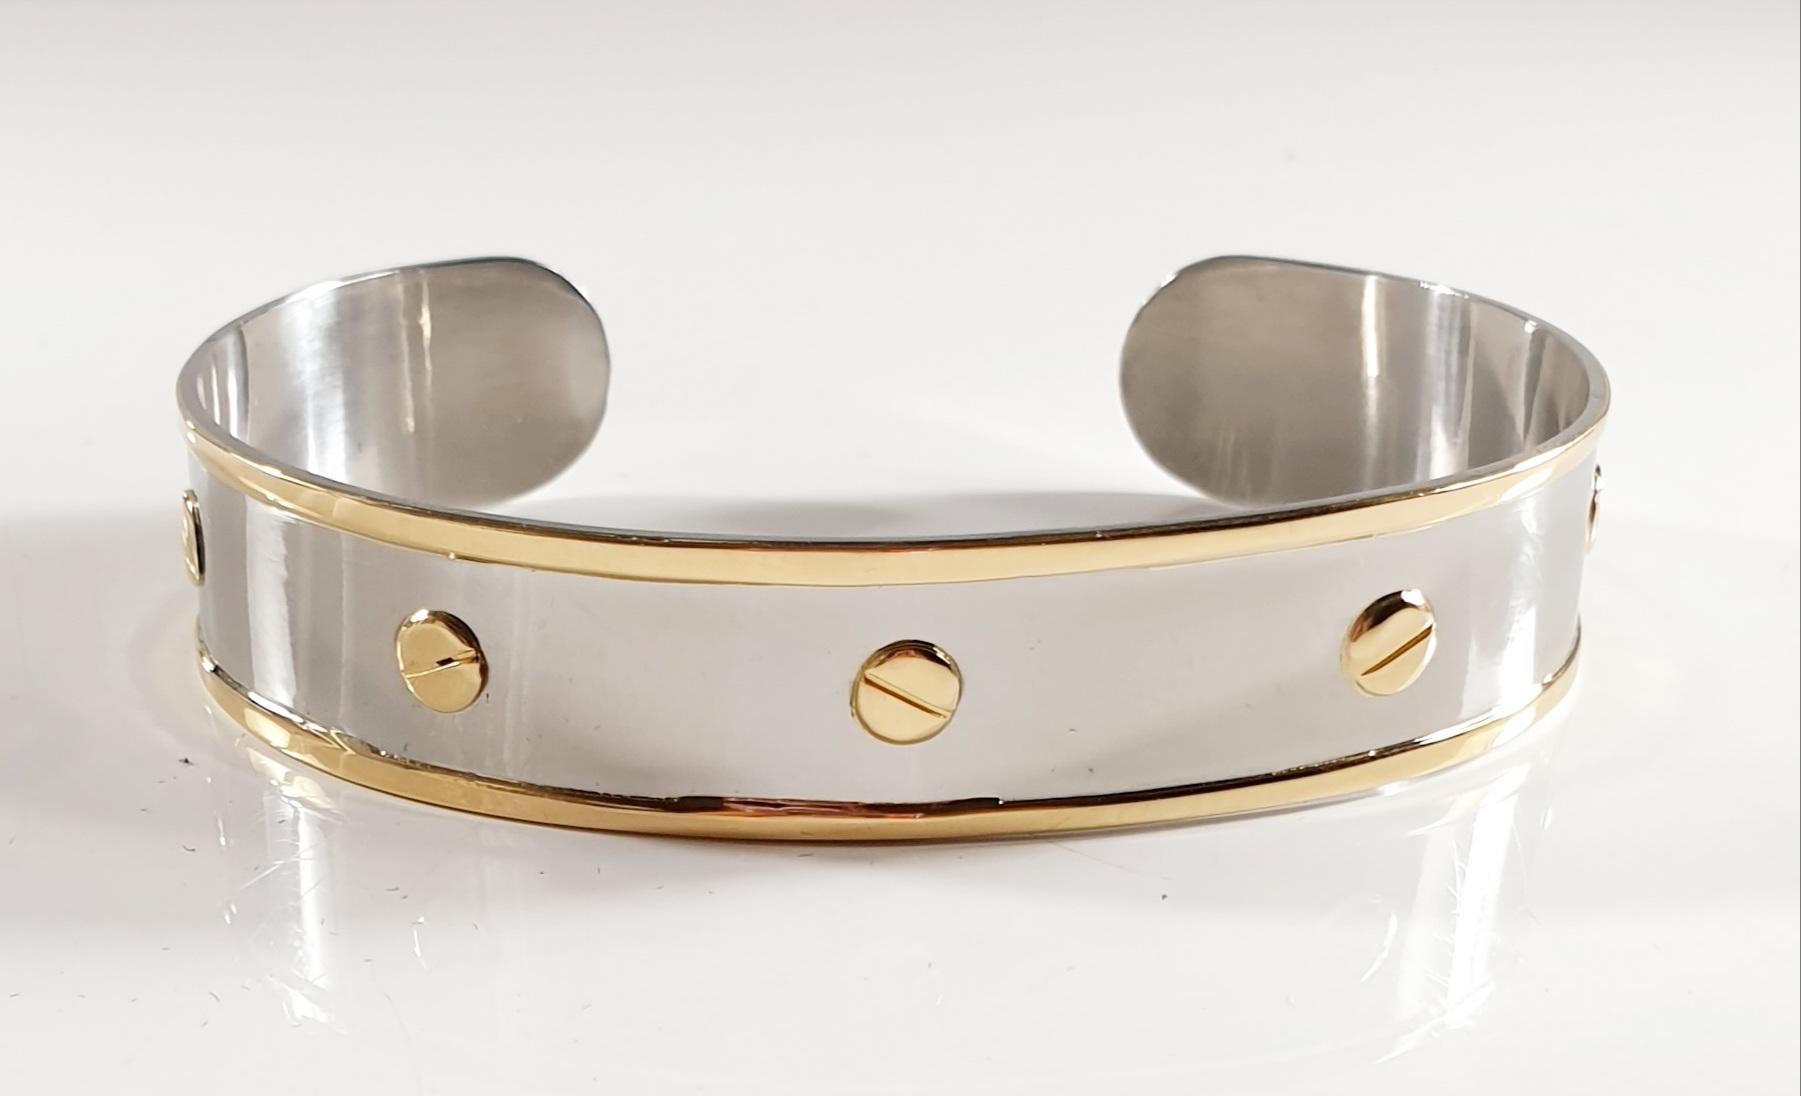 One of the most stylish designs, this classic and estament  Love Bangle bracelet
Crafted in stainless steel and  18k Yellow Gold
weights 22,8 grams.
Size for medium wrists lenght  17cm 6,69inches x 1cm  0,39 inches

PRADERA is a second generation of